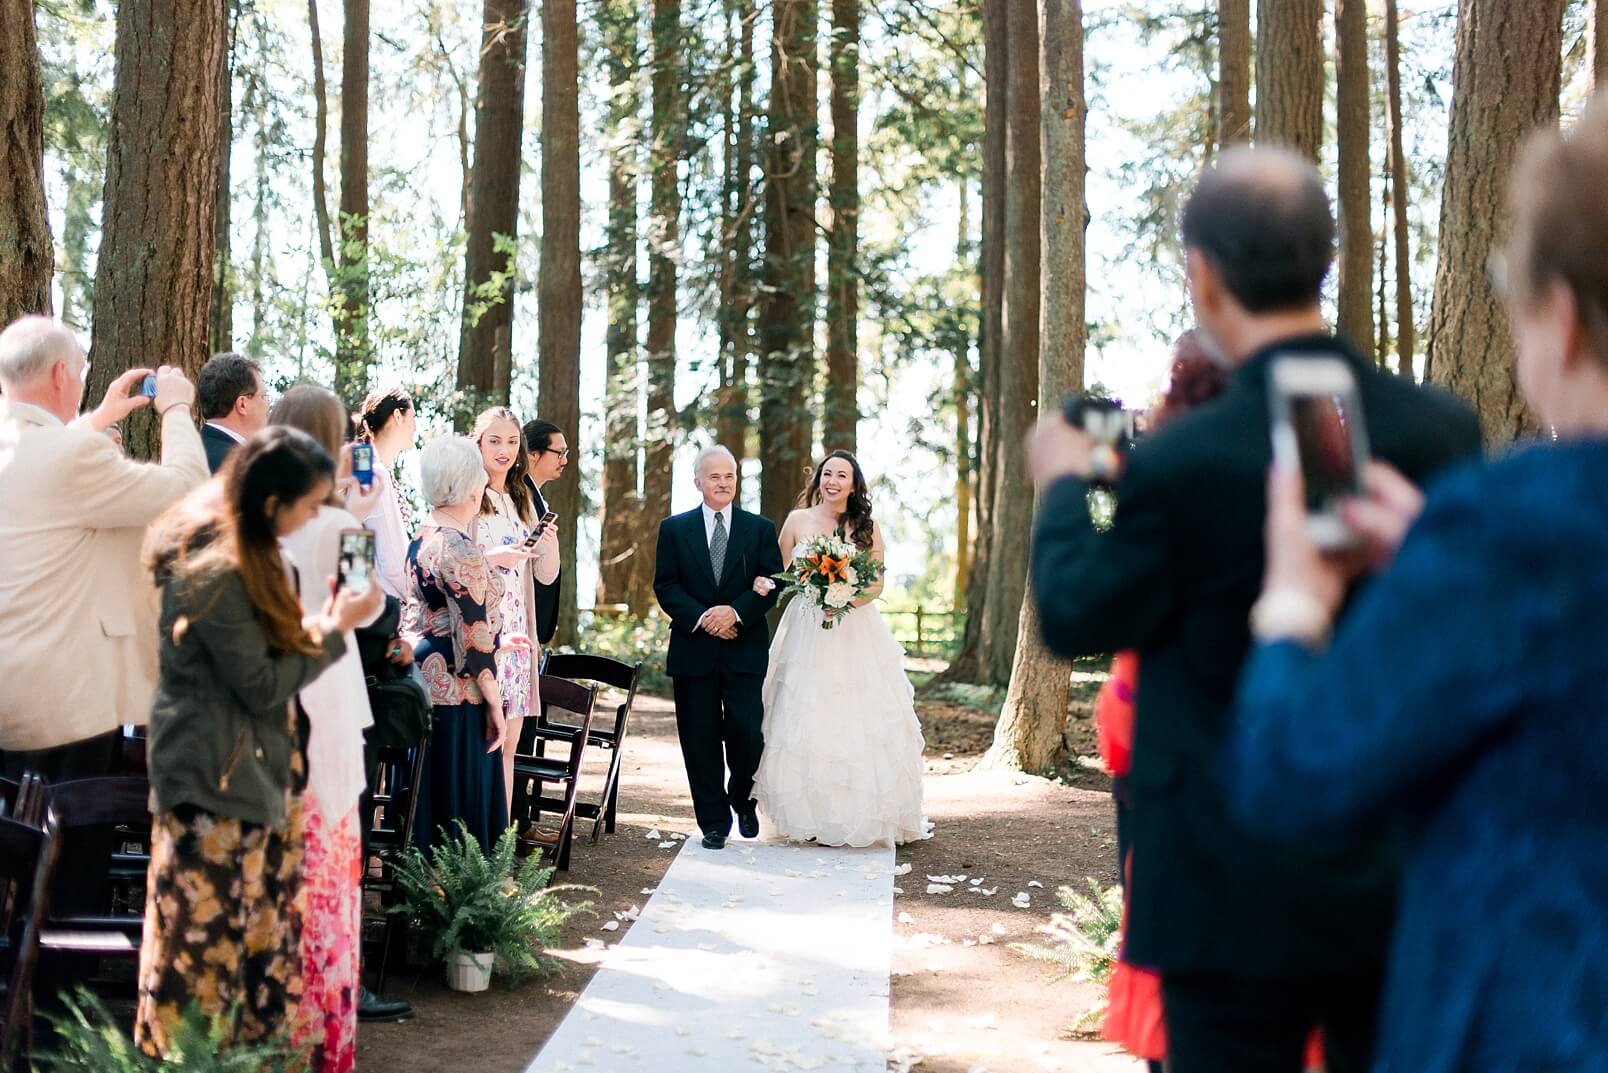 Kitsap County wedding ceremony in the forest